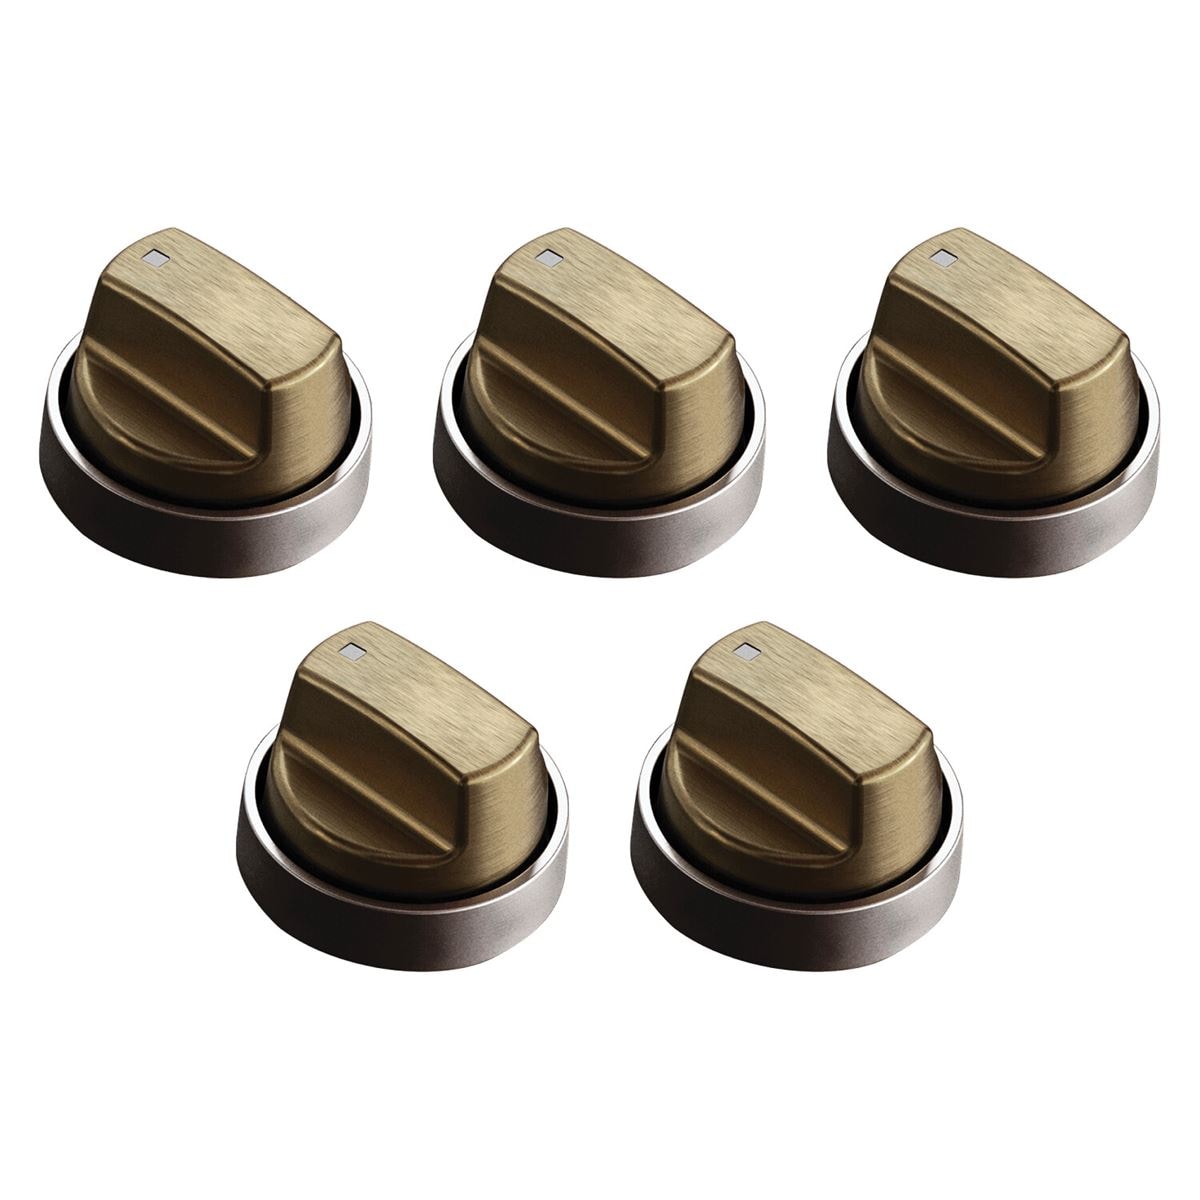 36 Professional Gas Cooktop Brushed Brass Knob Kit